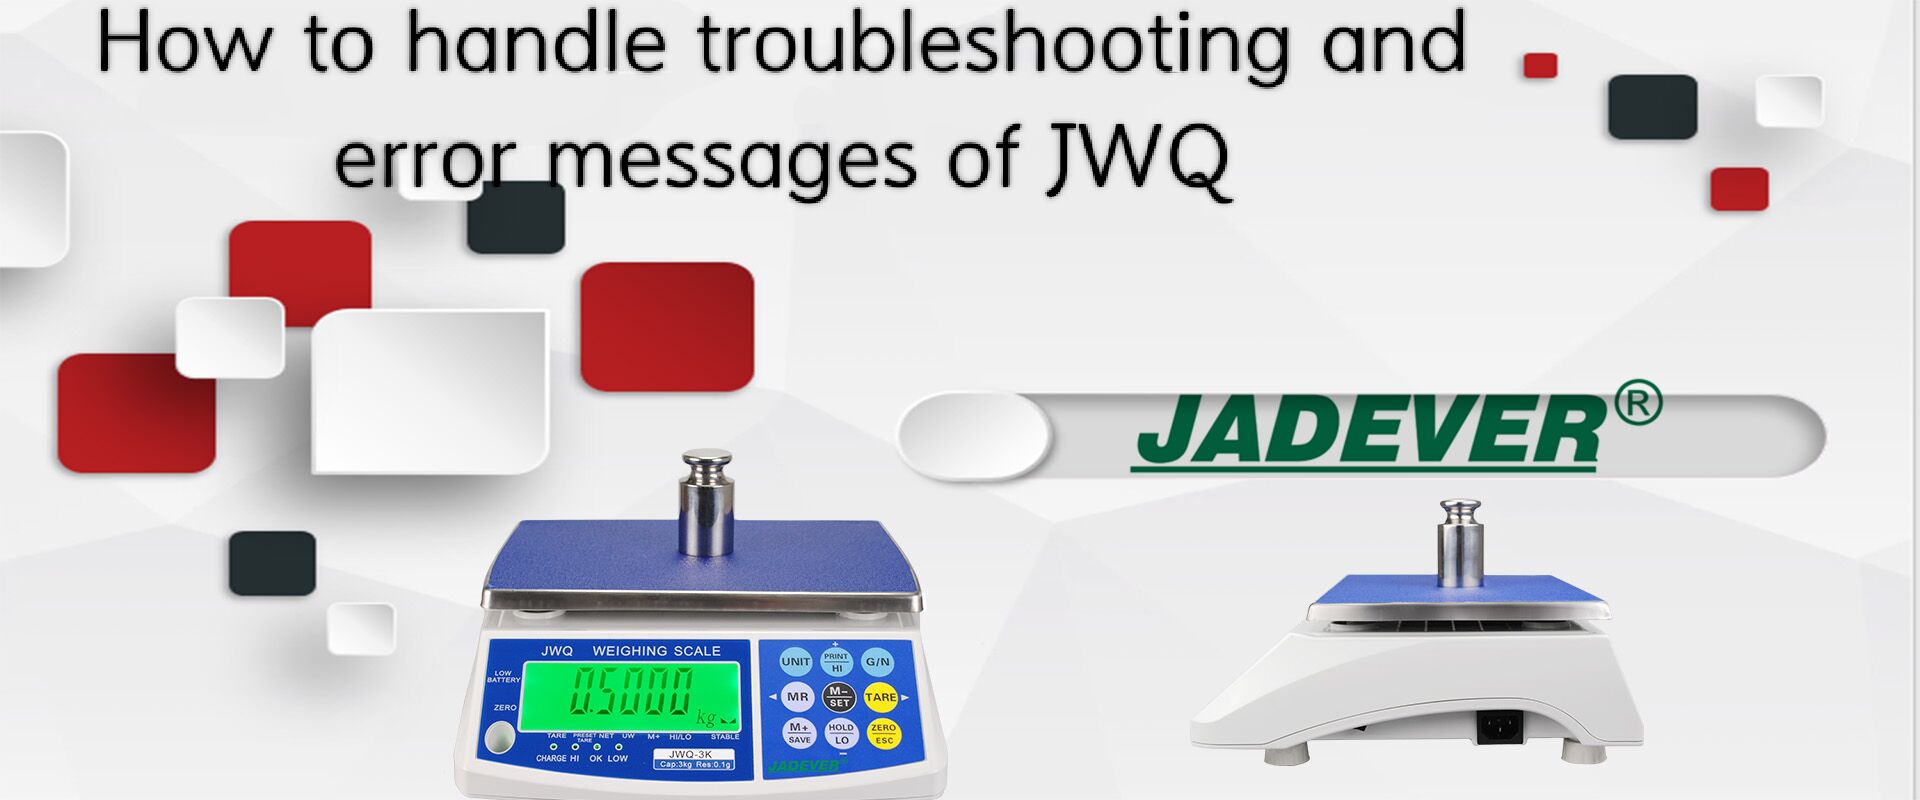 How to handle troubleshooting and error messages of JWQ?